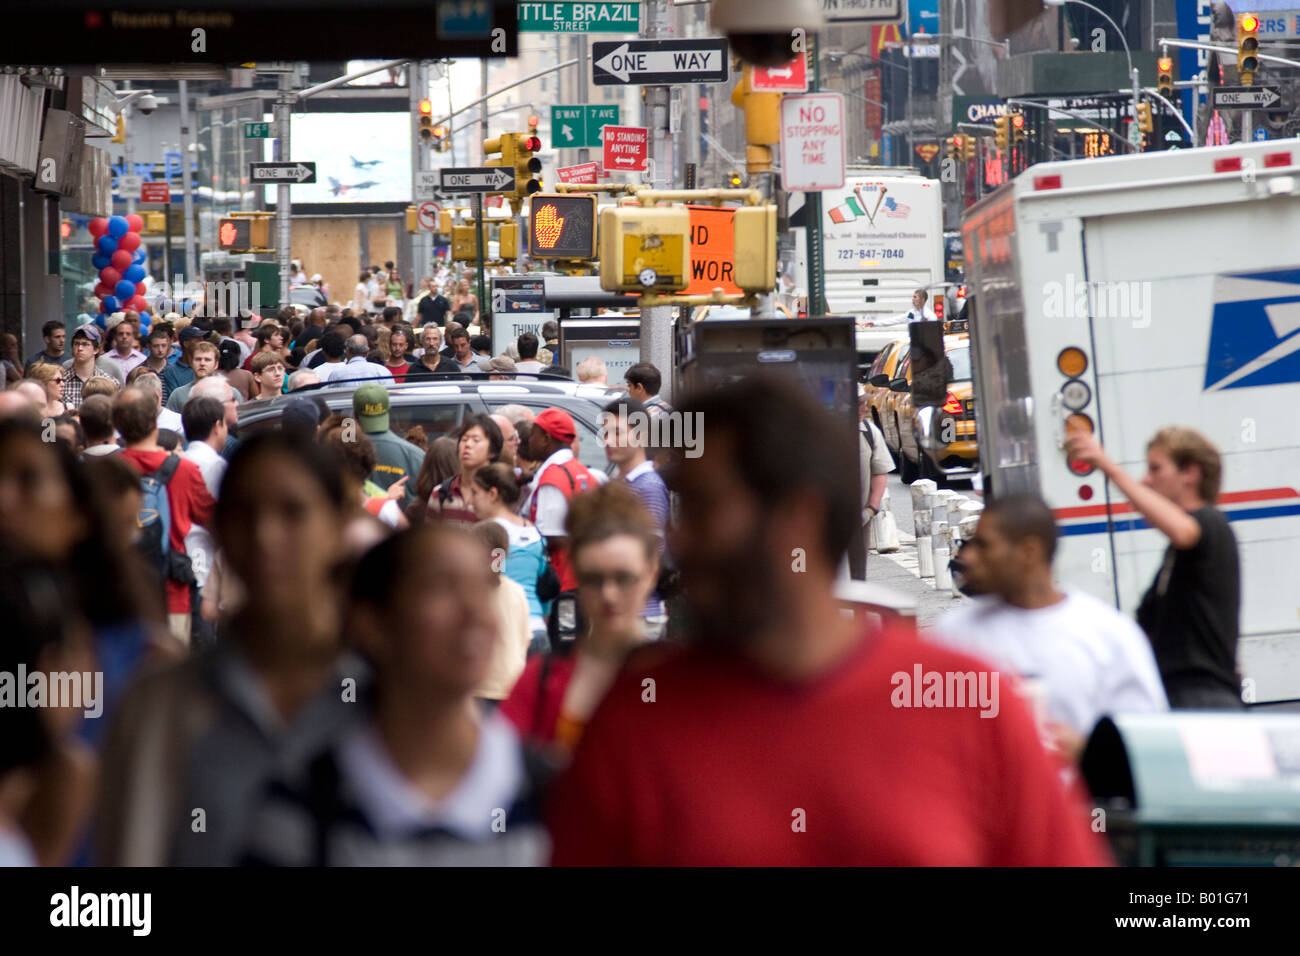 A crowd scene at Times Square, New York, New York, USA. Stock Photo